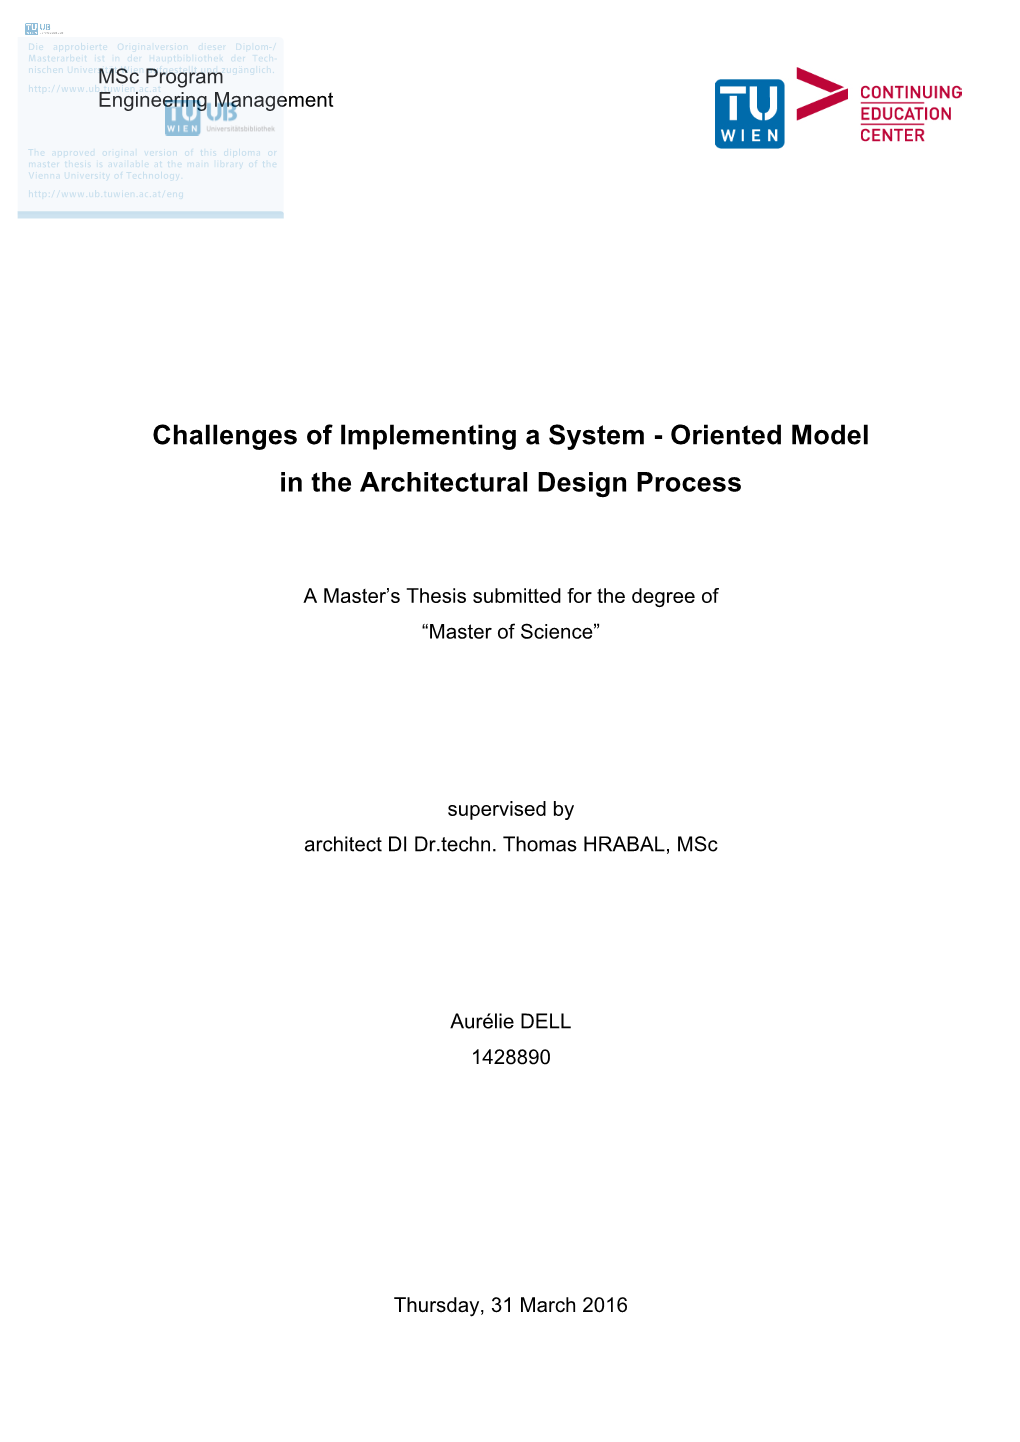 Challenges of Implementing a System - Oriented Model in the Architectural Design Process